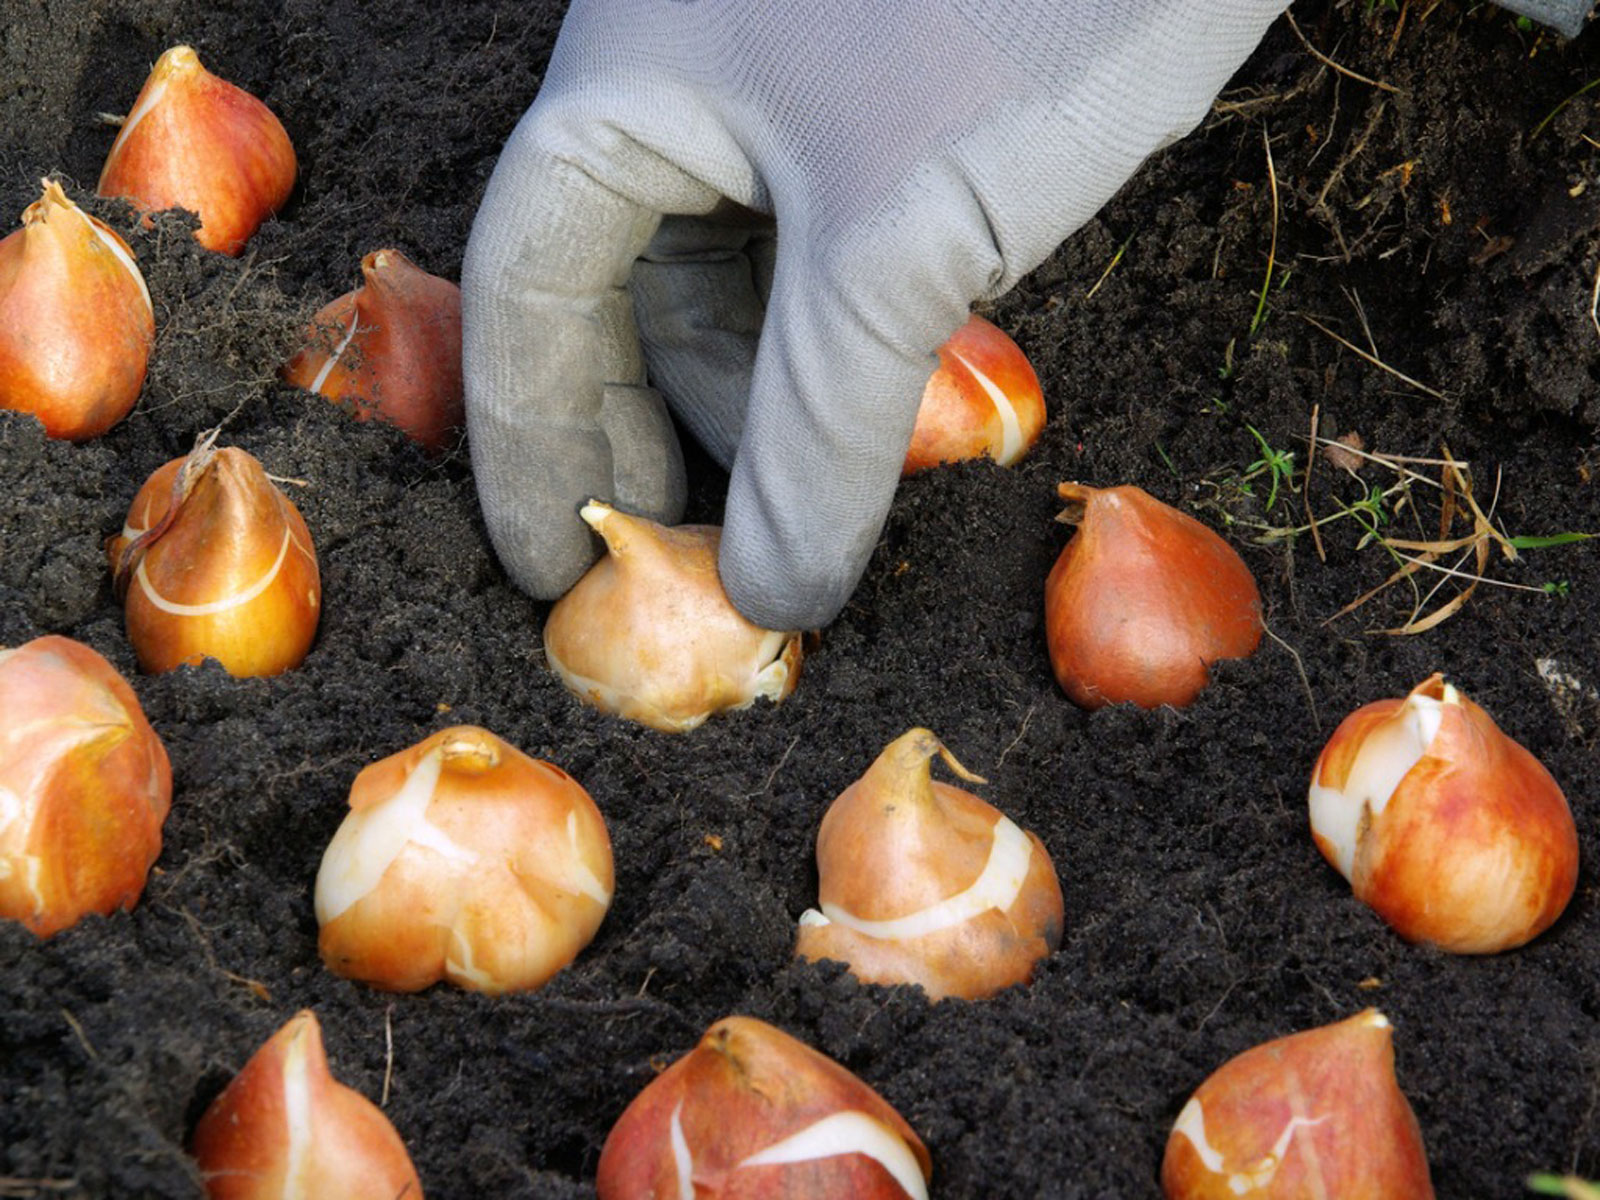 When to plant your bulbs